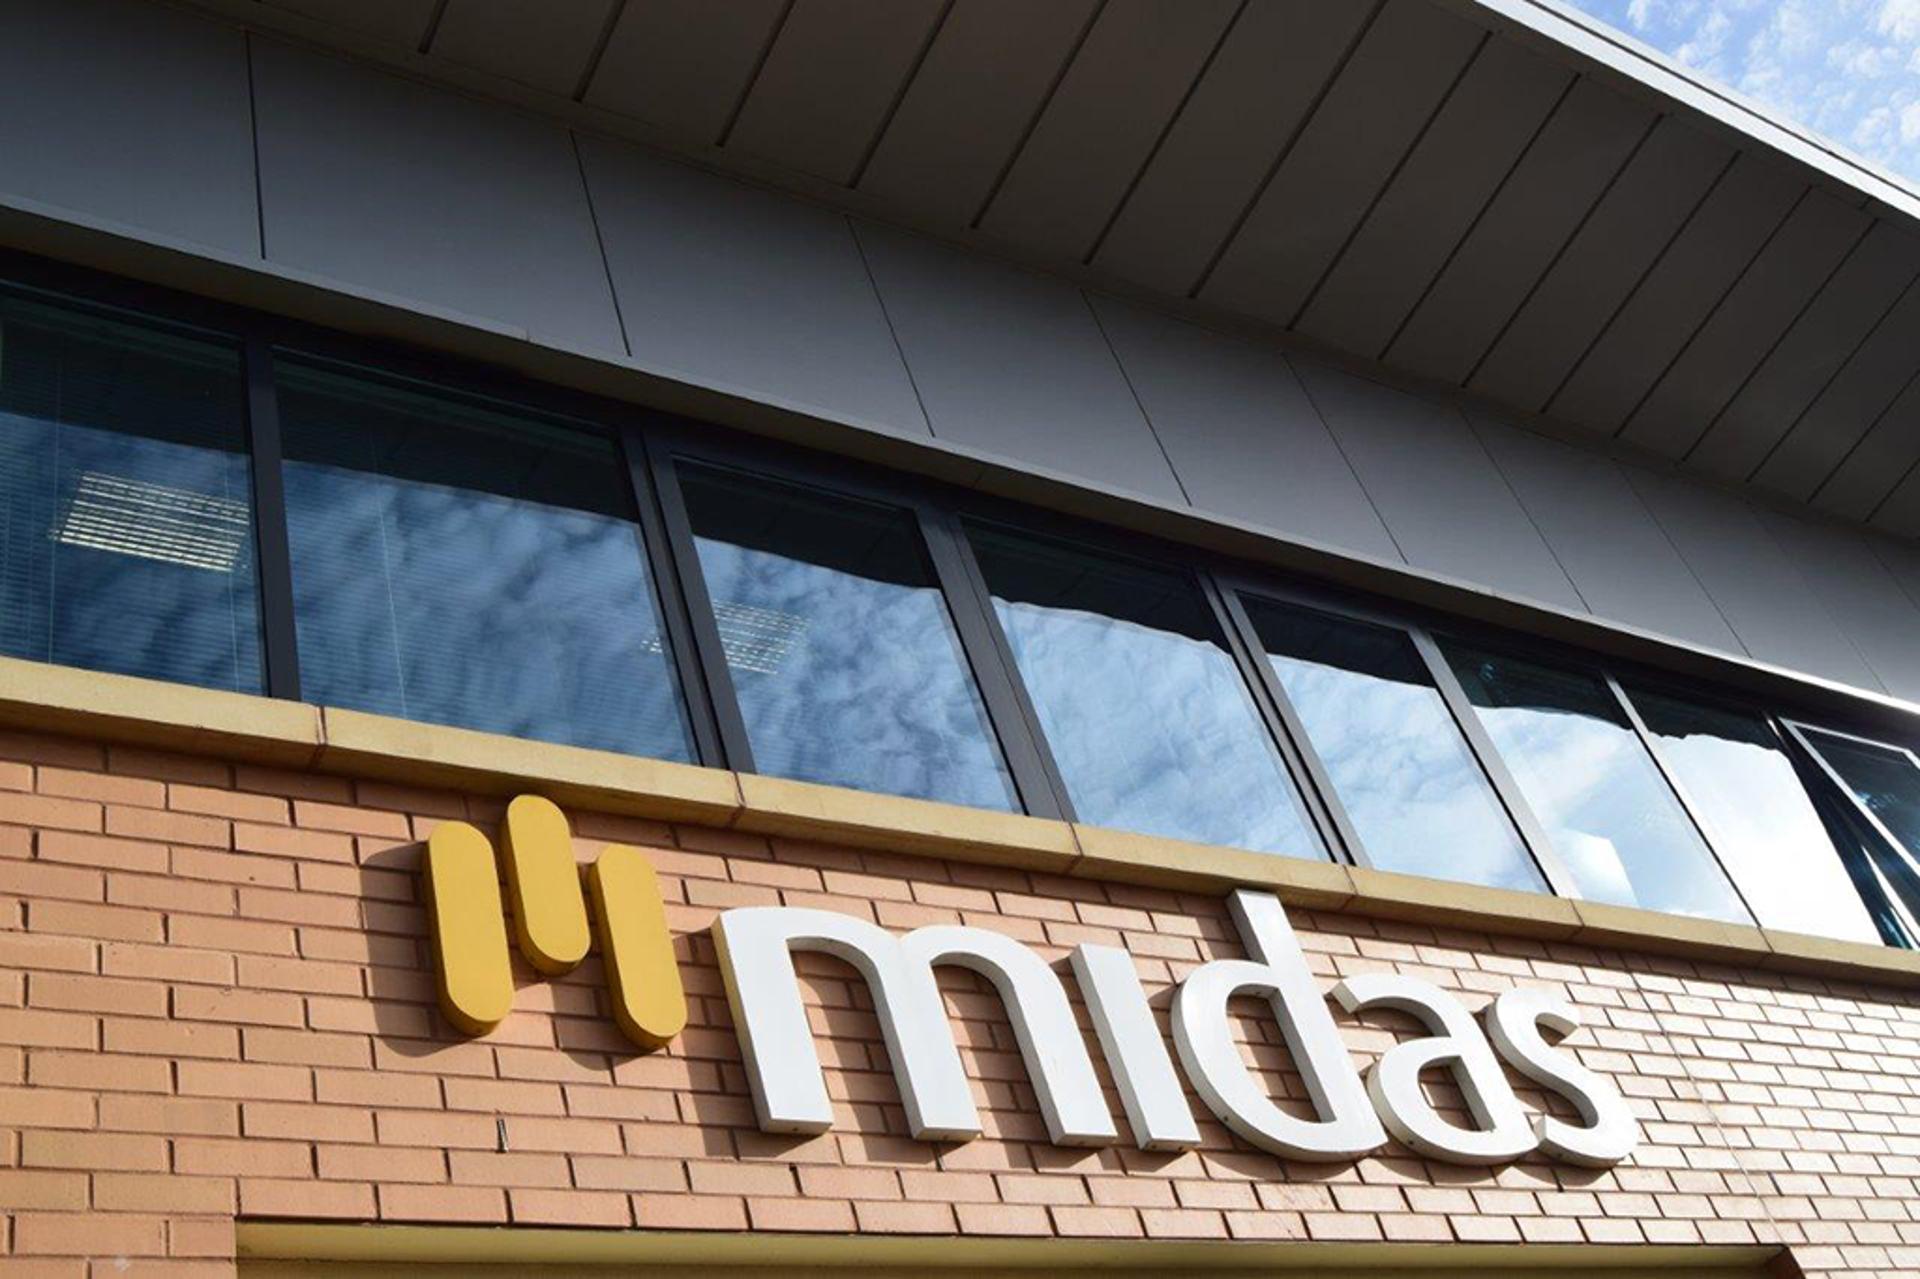 Property services division sold as Midas enters administration